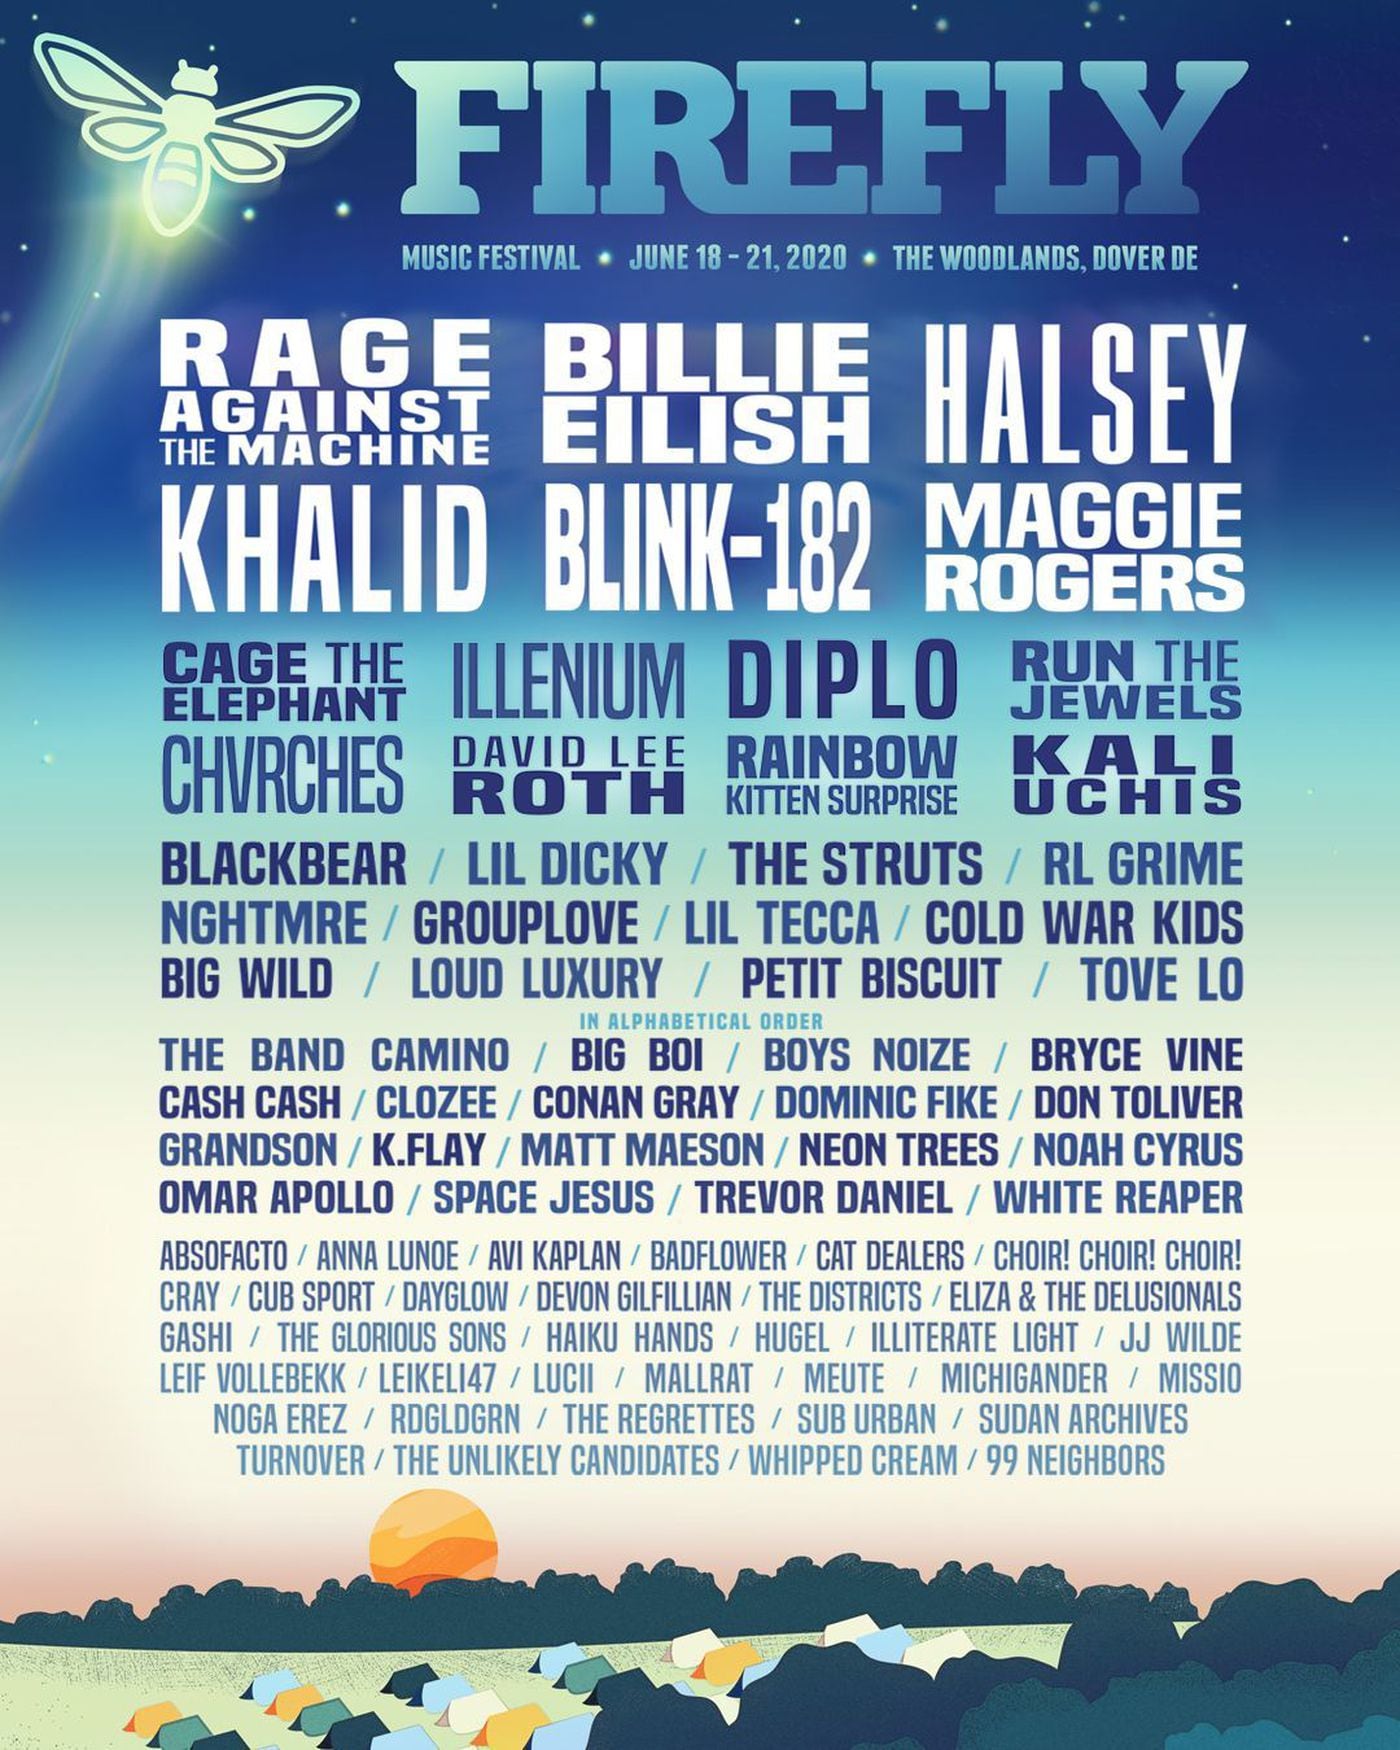 The 2020 Firefly Festival lineup.